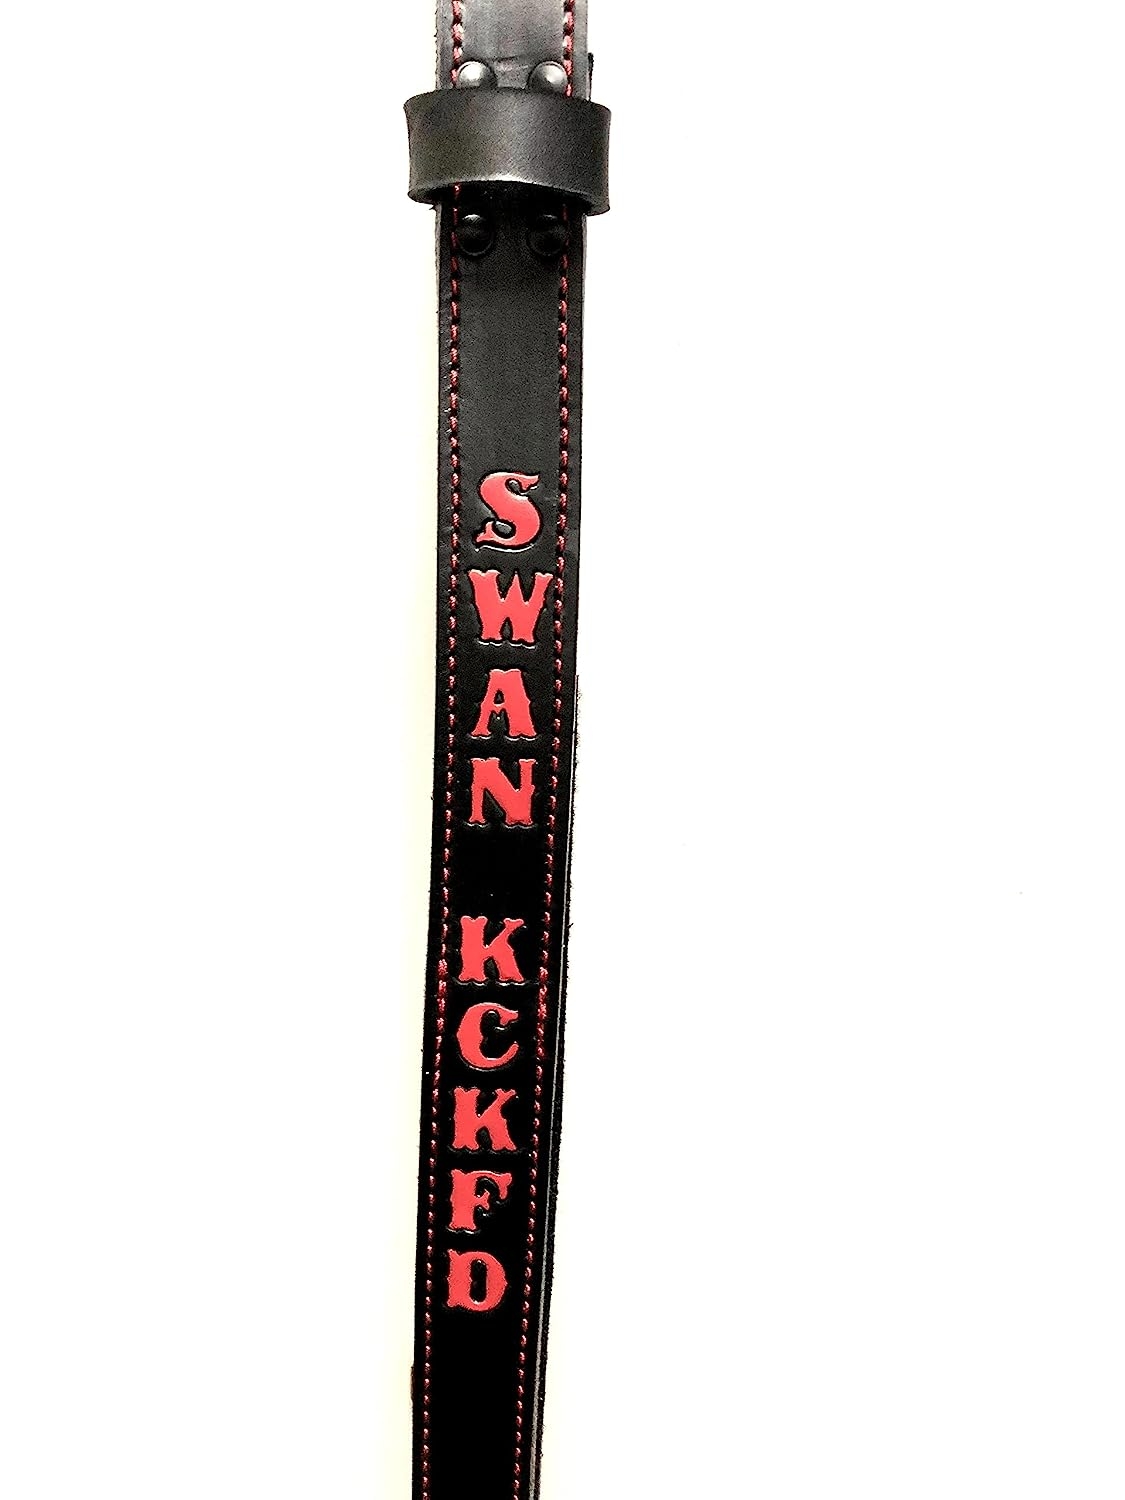 Personalized Custom Firefighter Radio Strap – EMS – EMT -Paramedic – Great Gift for Firefighters – Leather and Handmade  